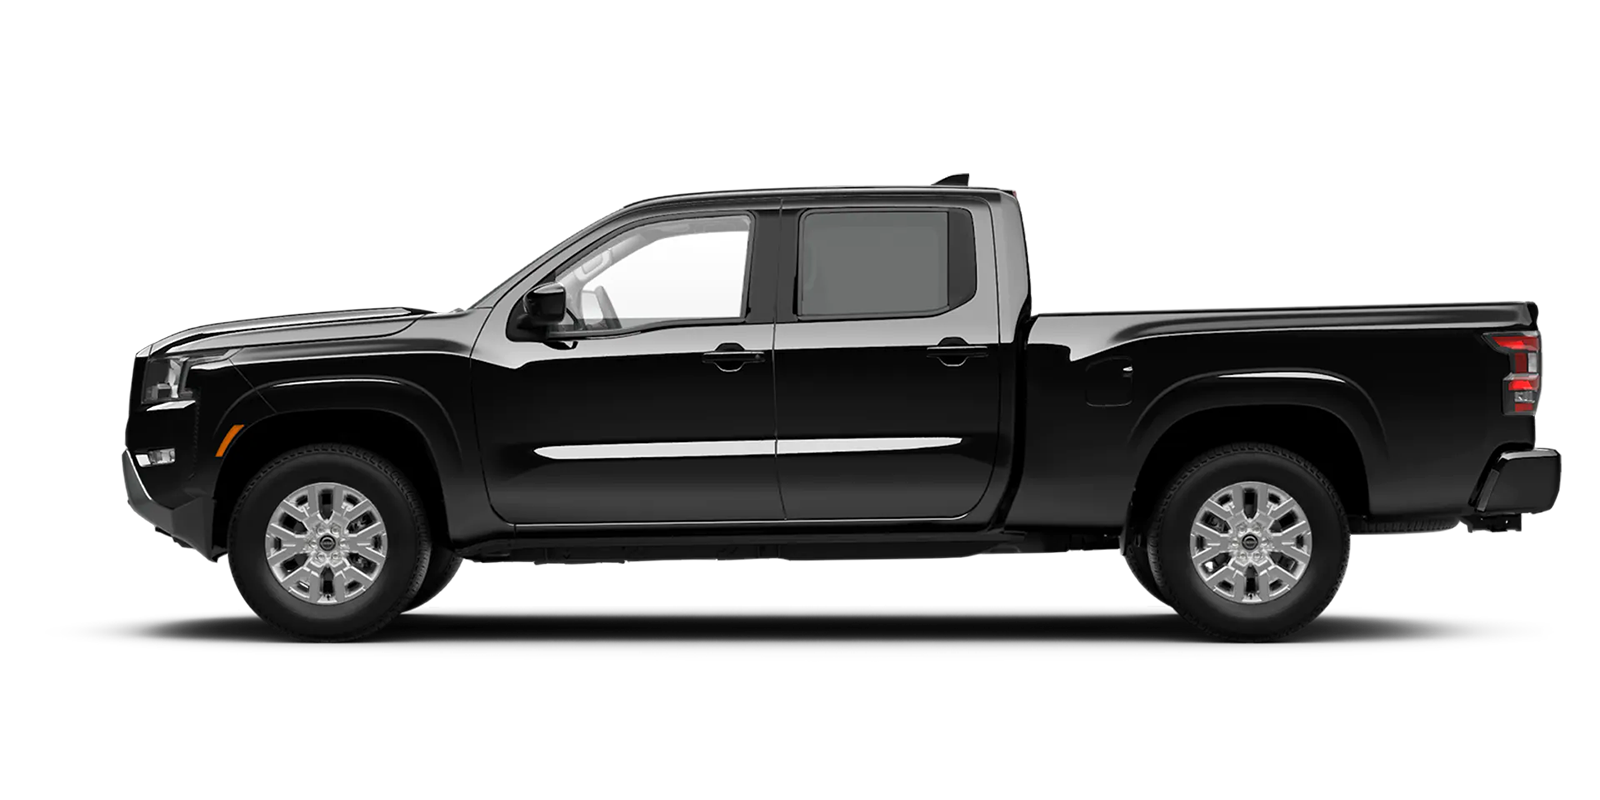 2022 Frontier Crew Cab Long Bed SV 4x4 in Super Black | Fort Collins Nissan in Fort Collins CO